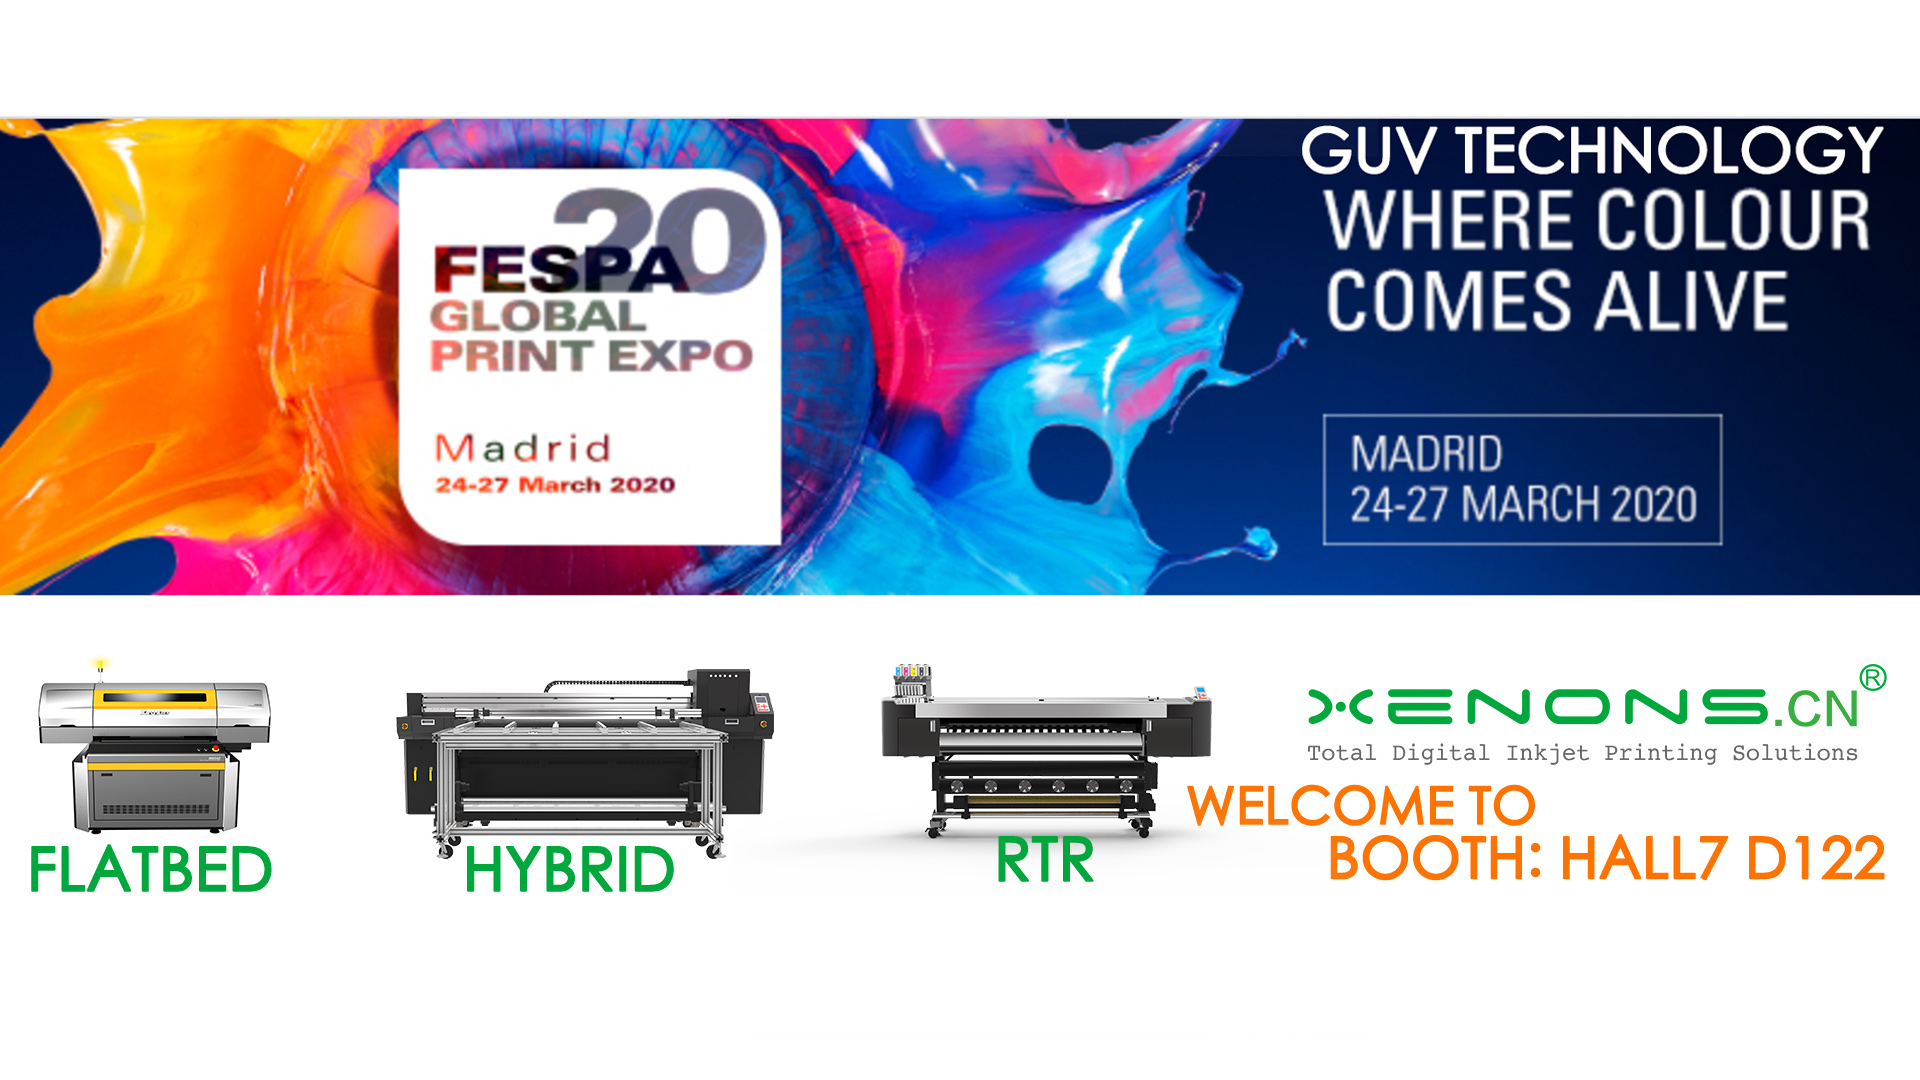 Invite you to the latest GUV Technoloy on XENONS FESPA Madrid